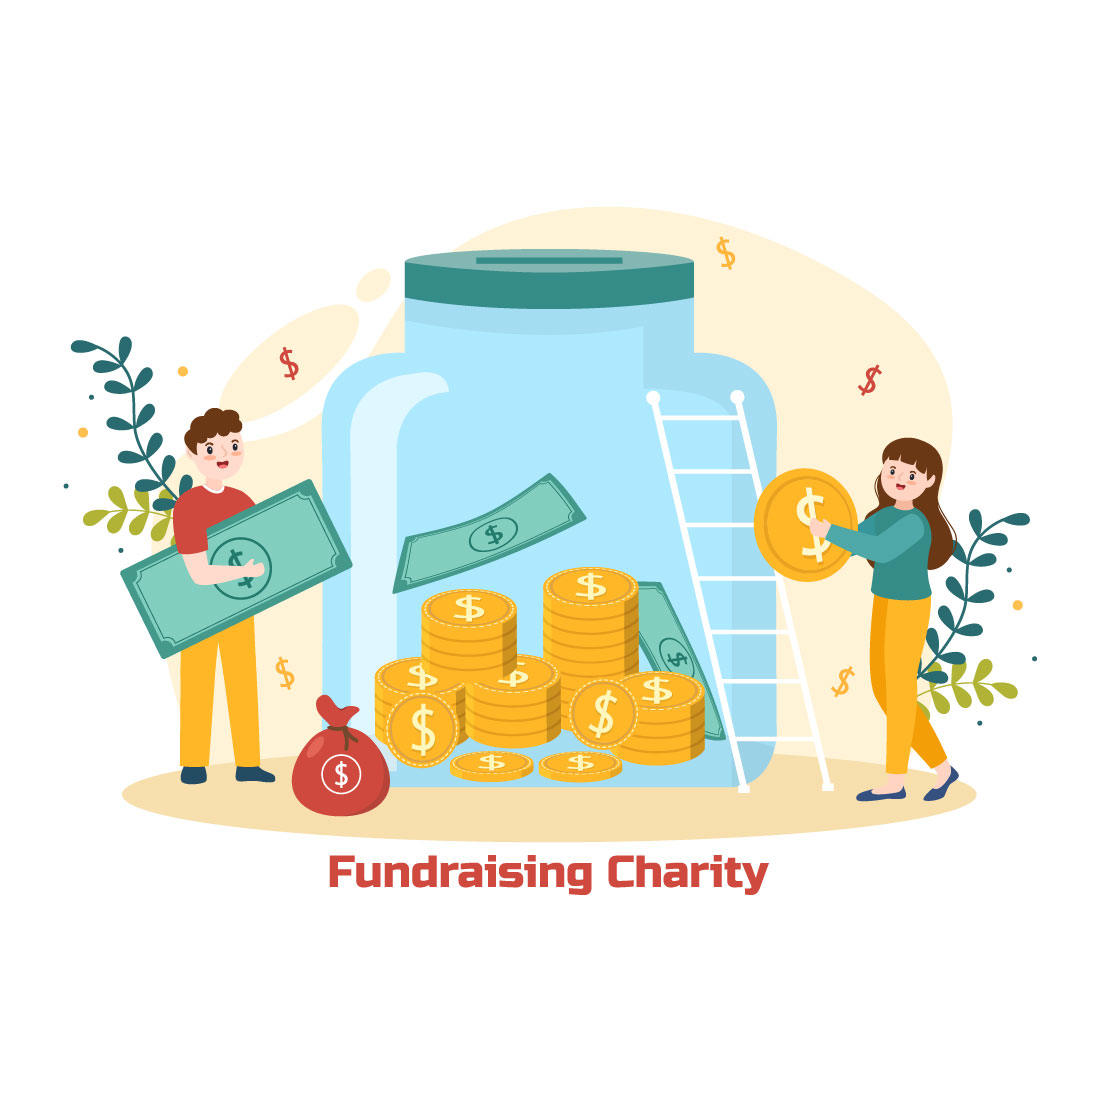 12 Fundraising Charity and Donation Illustration cover image.